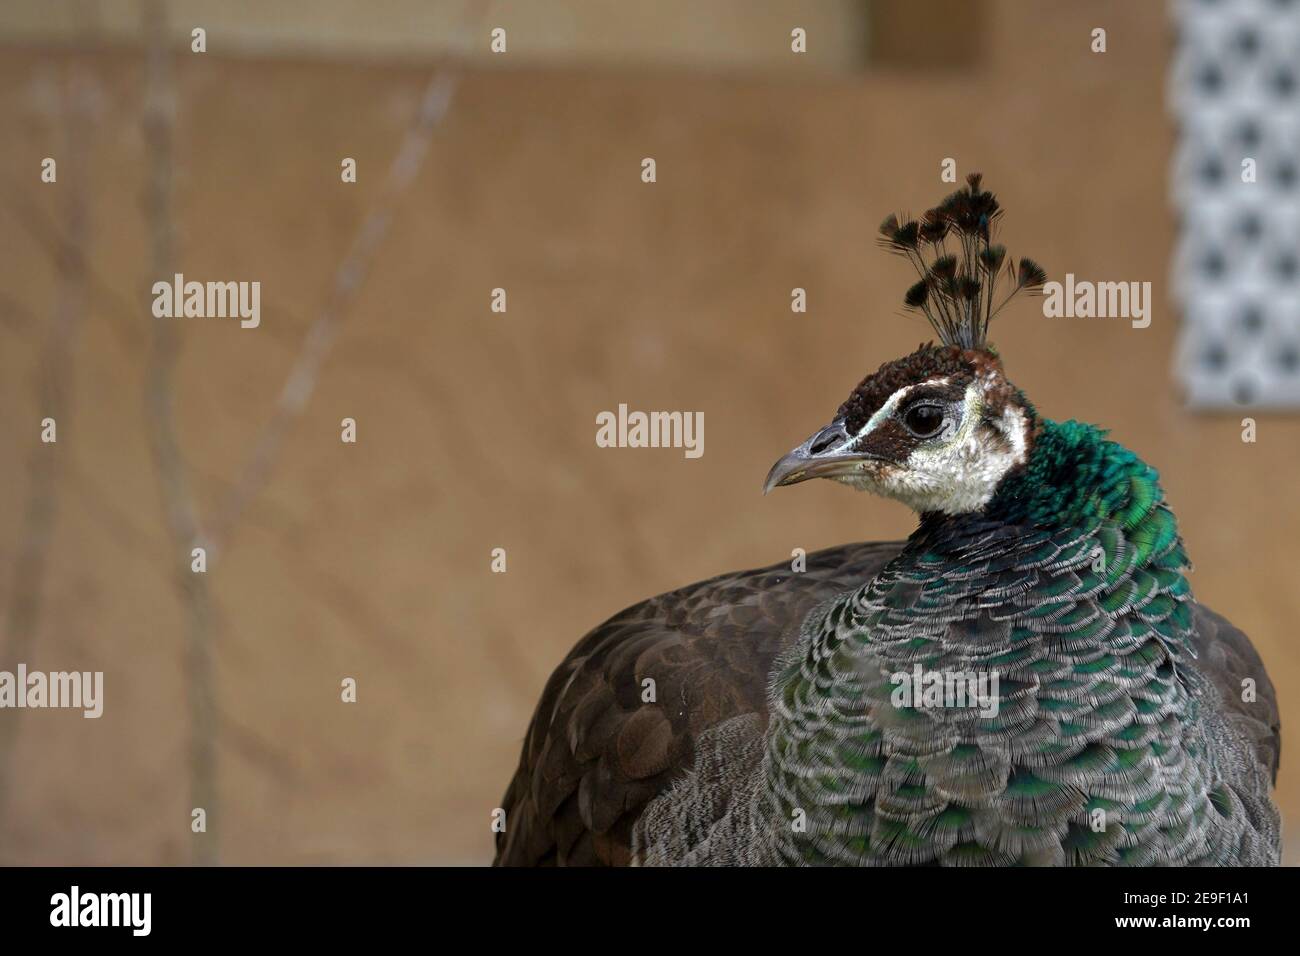 Female peacock or peahen, called also Indian or common peafowl, in Latin Pavo cristatus with a lot of copy space on the background. Stock Photo